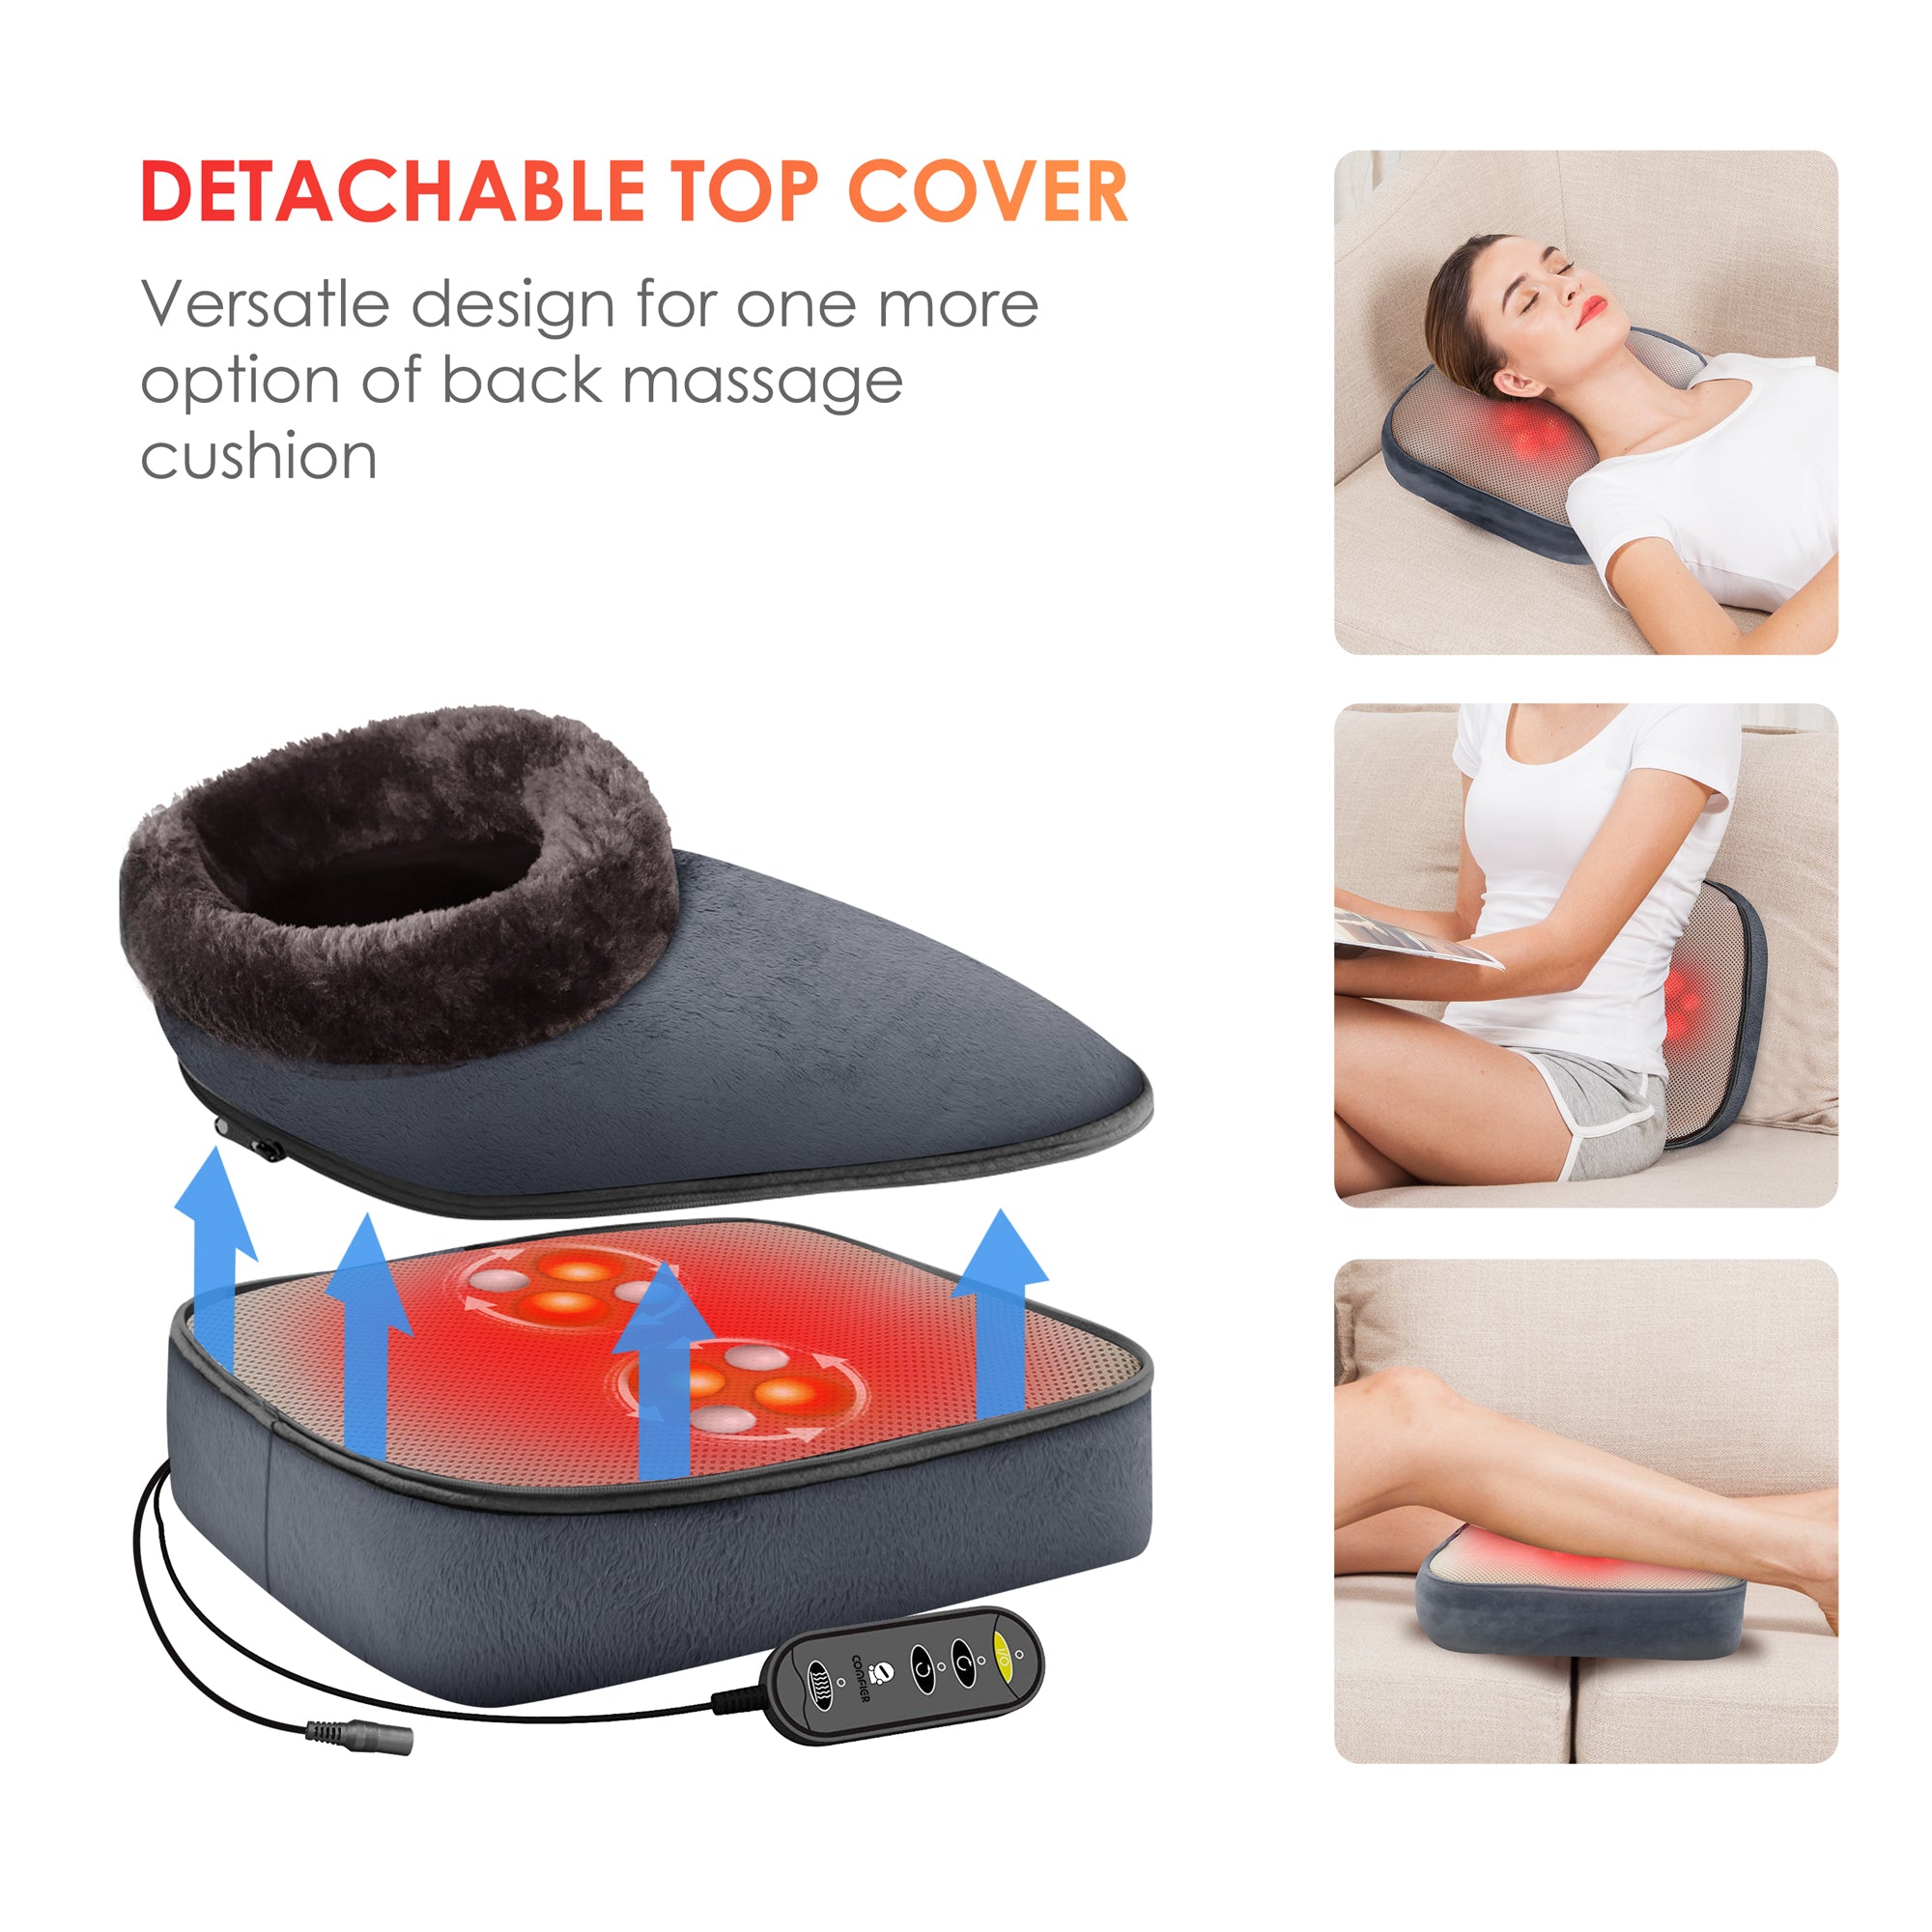 Comfier Shiatsu Foot Massager with Heat,Electric Heated Foot Warmer for Plantar Fasciitis,Neuropathy,Foot Stress Relief - 5202S